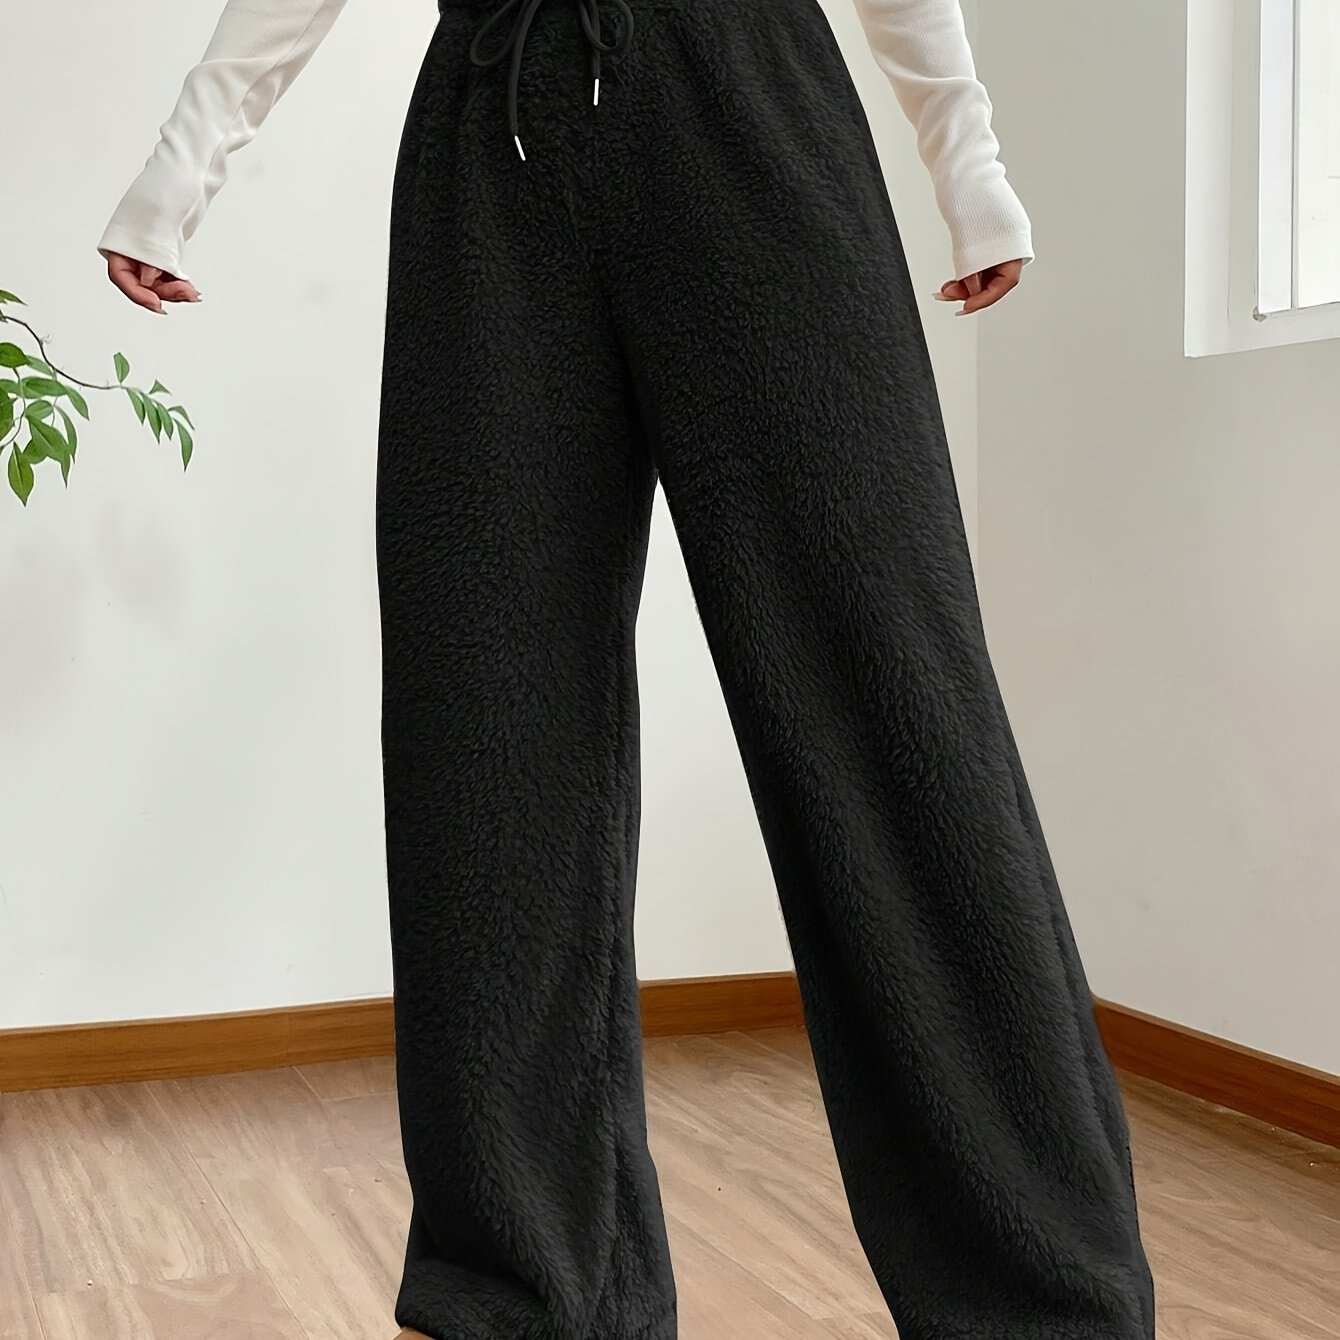 JNGSA Wide Leg Trouser Pants for Women,Women's Stright-Leg Pants Loose  Comfy Solid Color Trouser Drwastring Baggy Trouser with Pocket Buisness  Casual